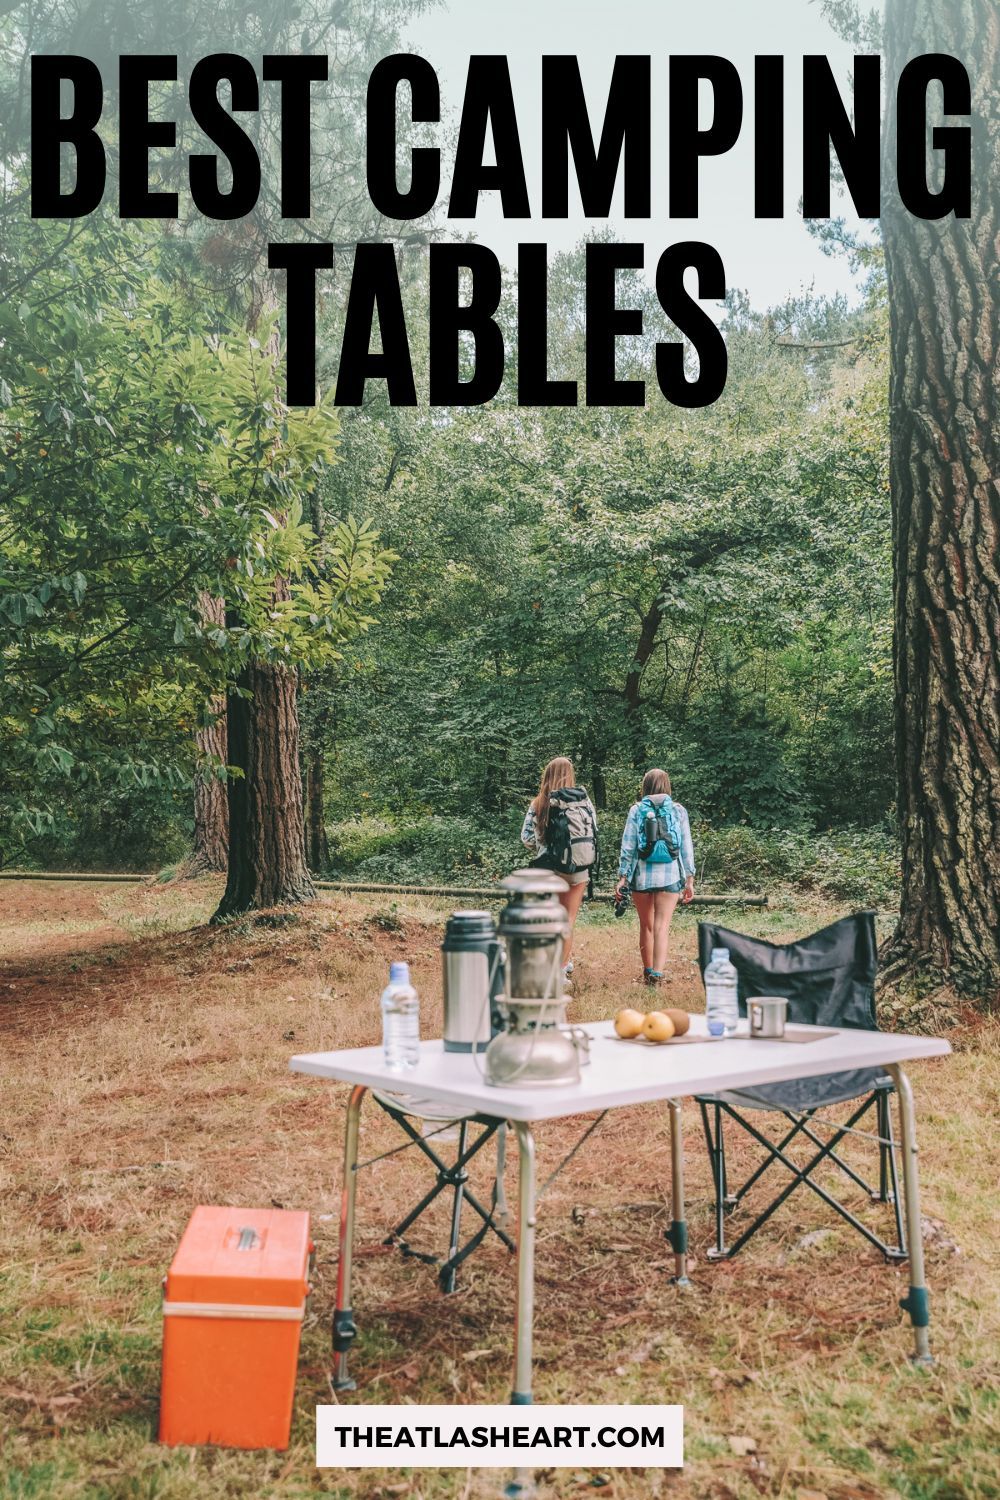 17 Best Camping Tables for Cooking & Eating in the Wilderness 